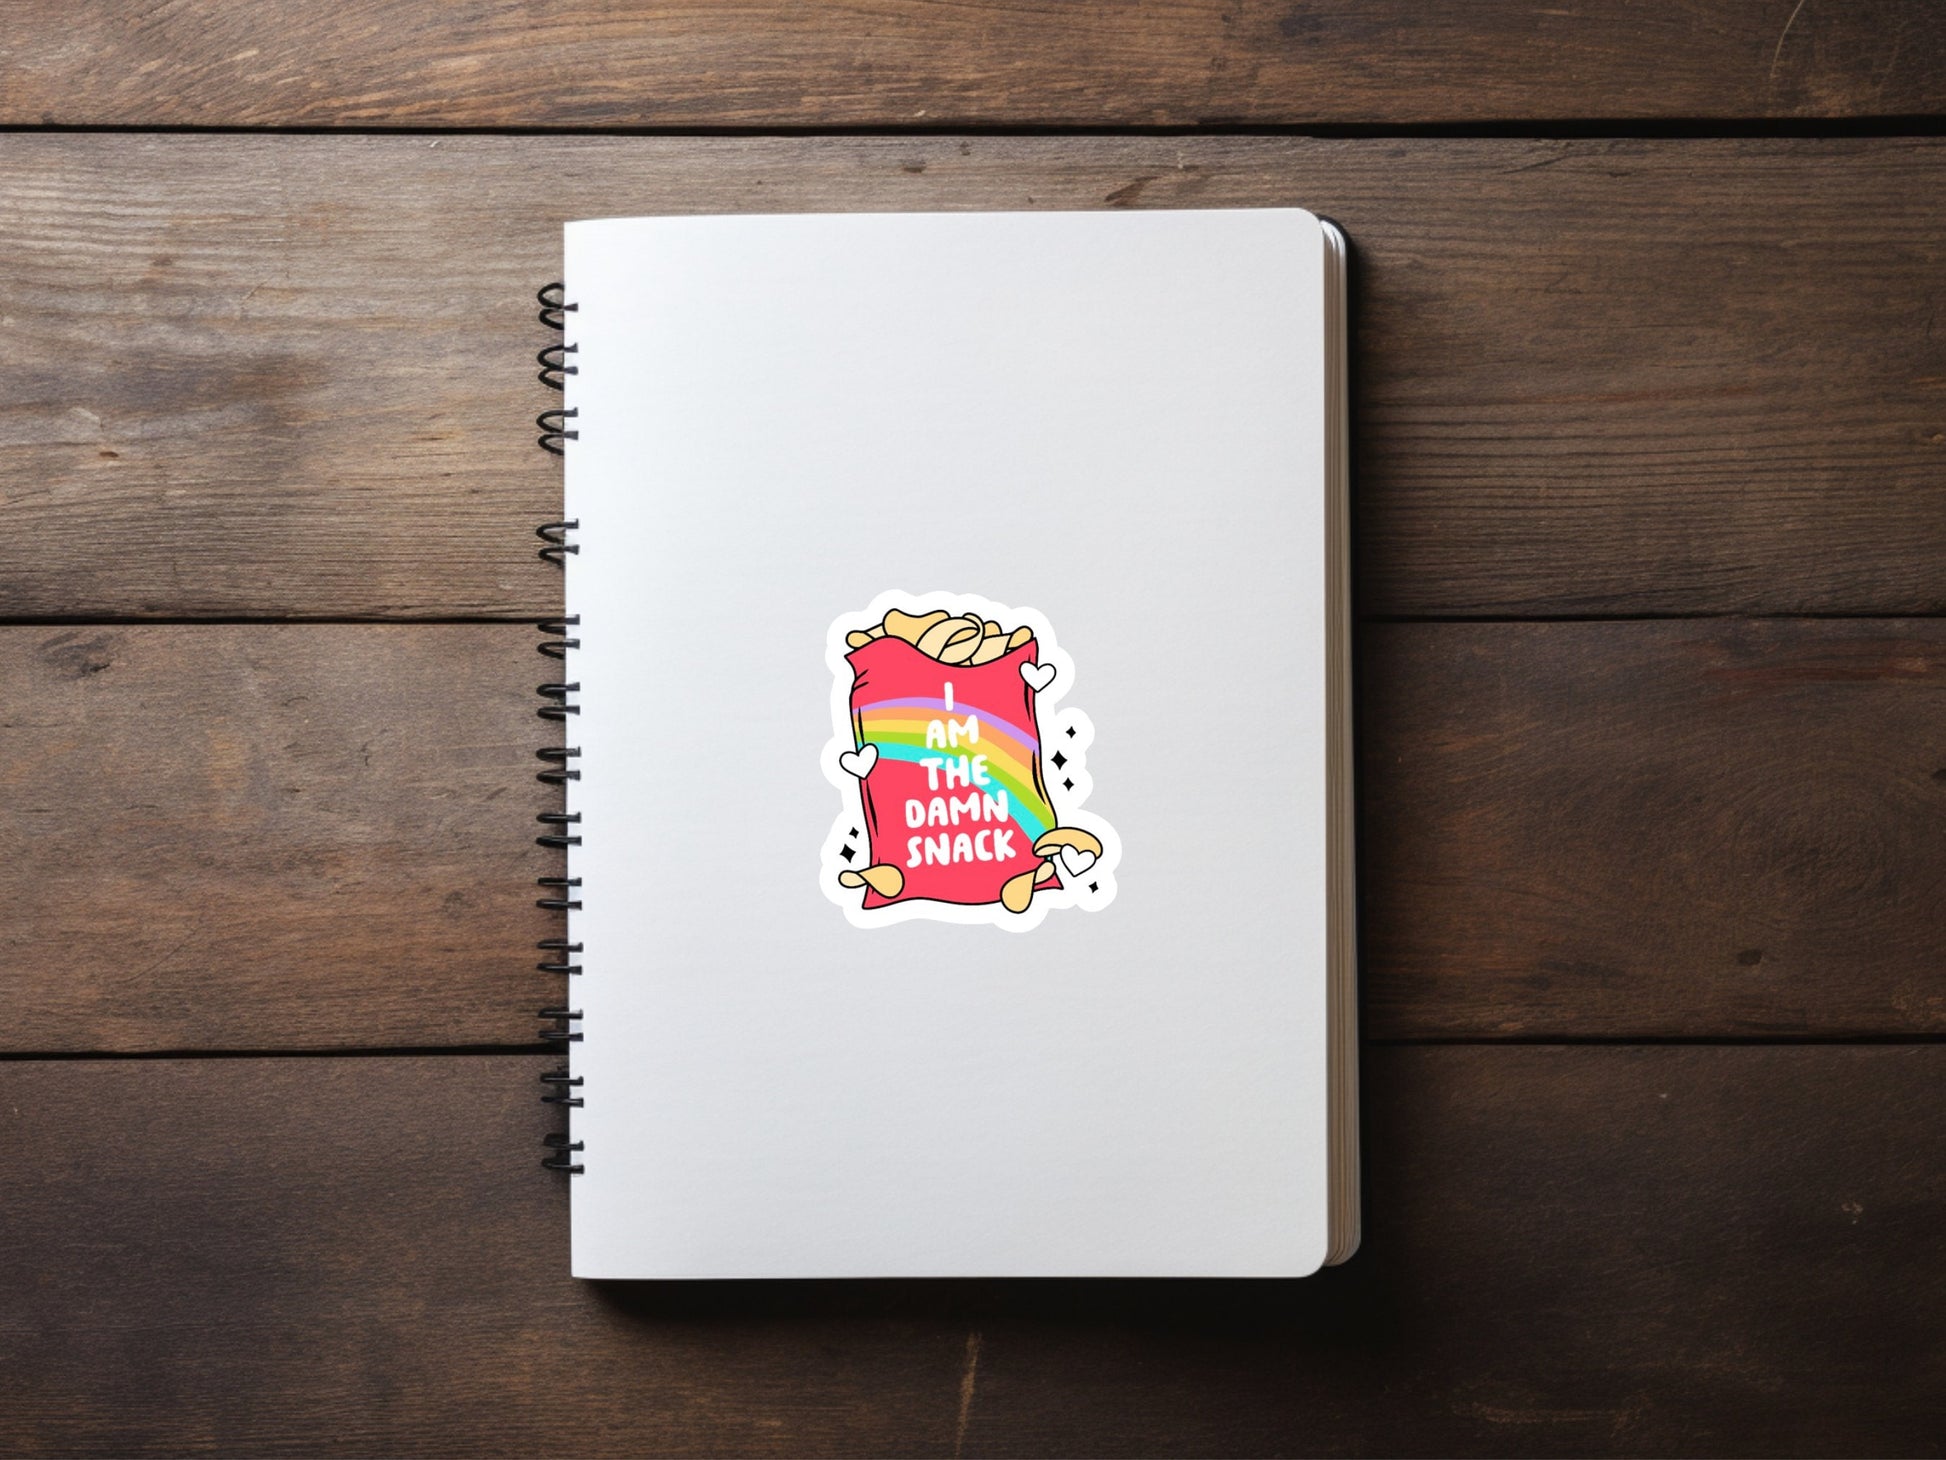 snacks sticker, funny stickers for friends, laptop stickers, coworker stickers, i am the snack, girl power sticker